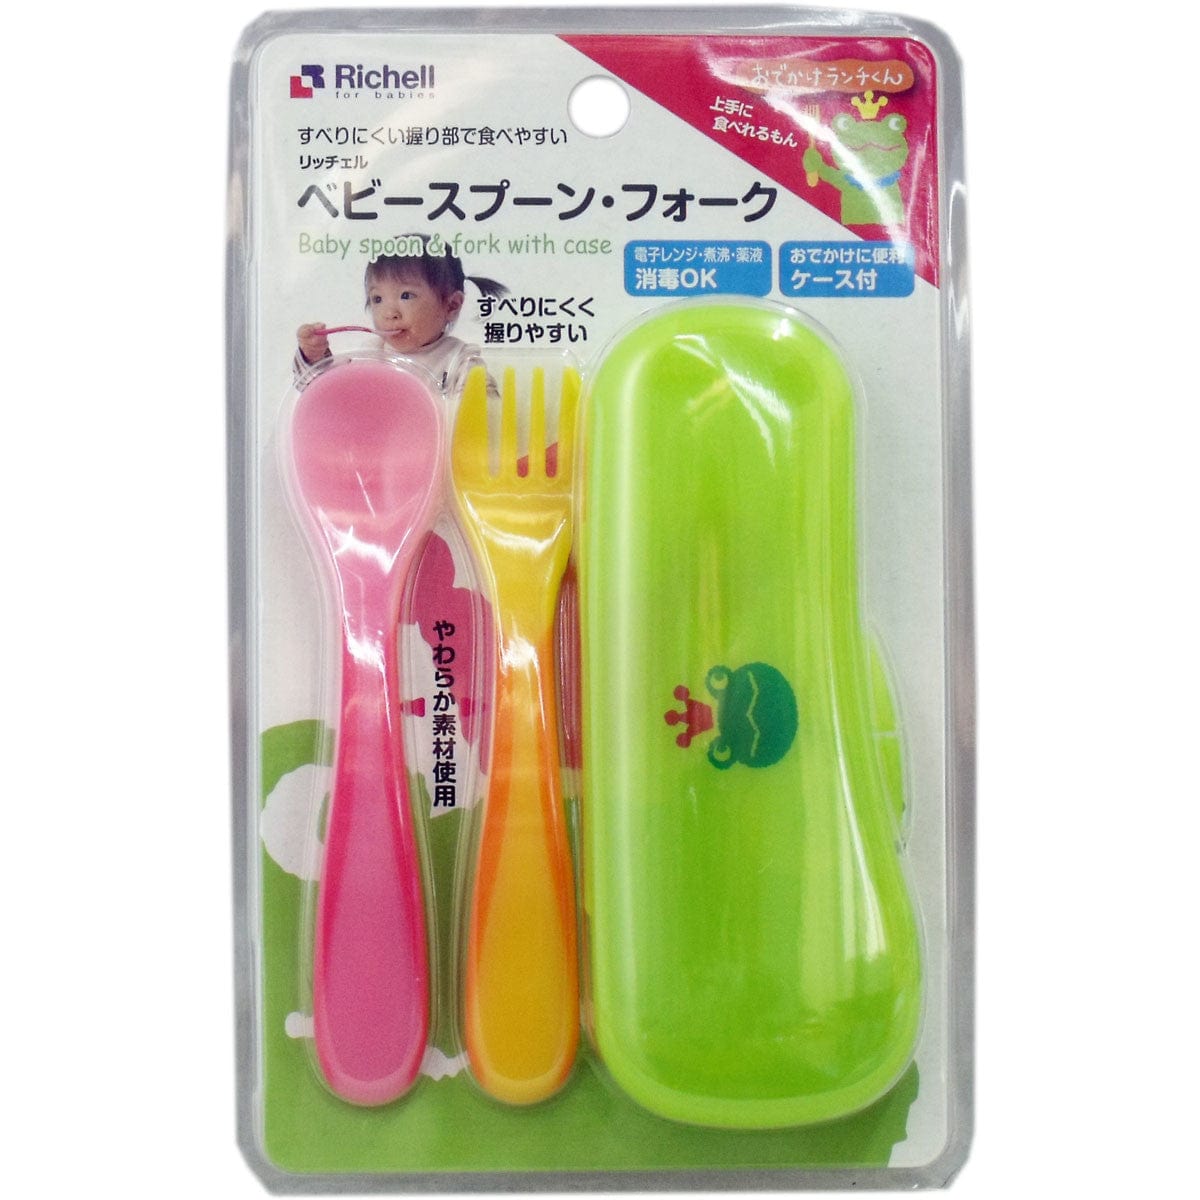 Richell - Odekake Baby Spoon and Fork with Storage Case -  Baby Spoon and Fork  Durio.sg